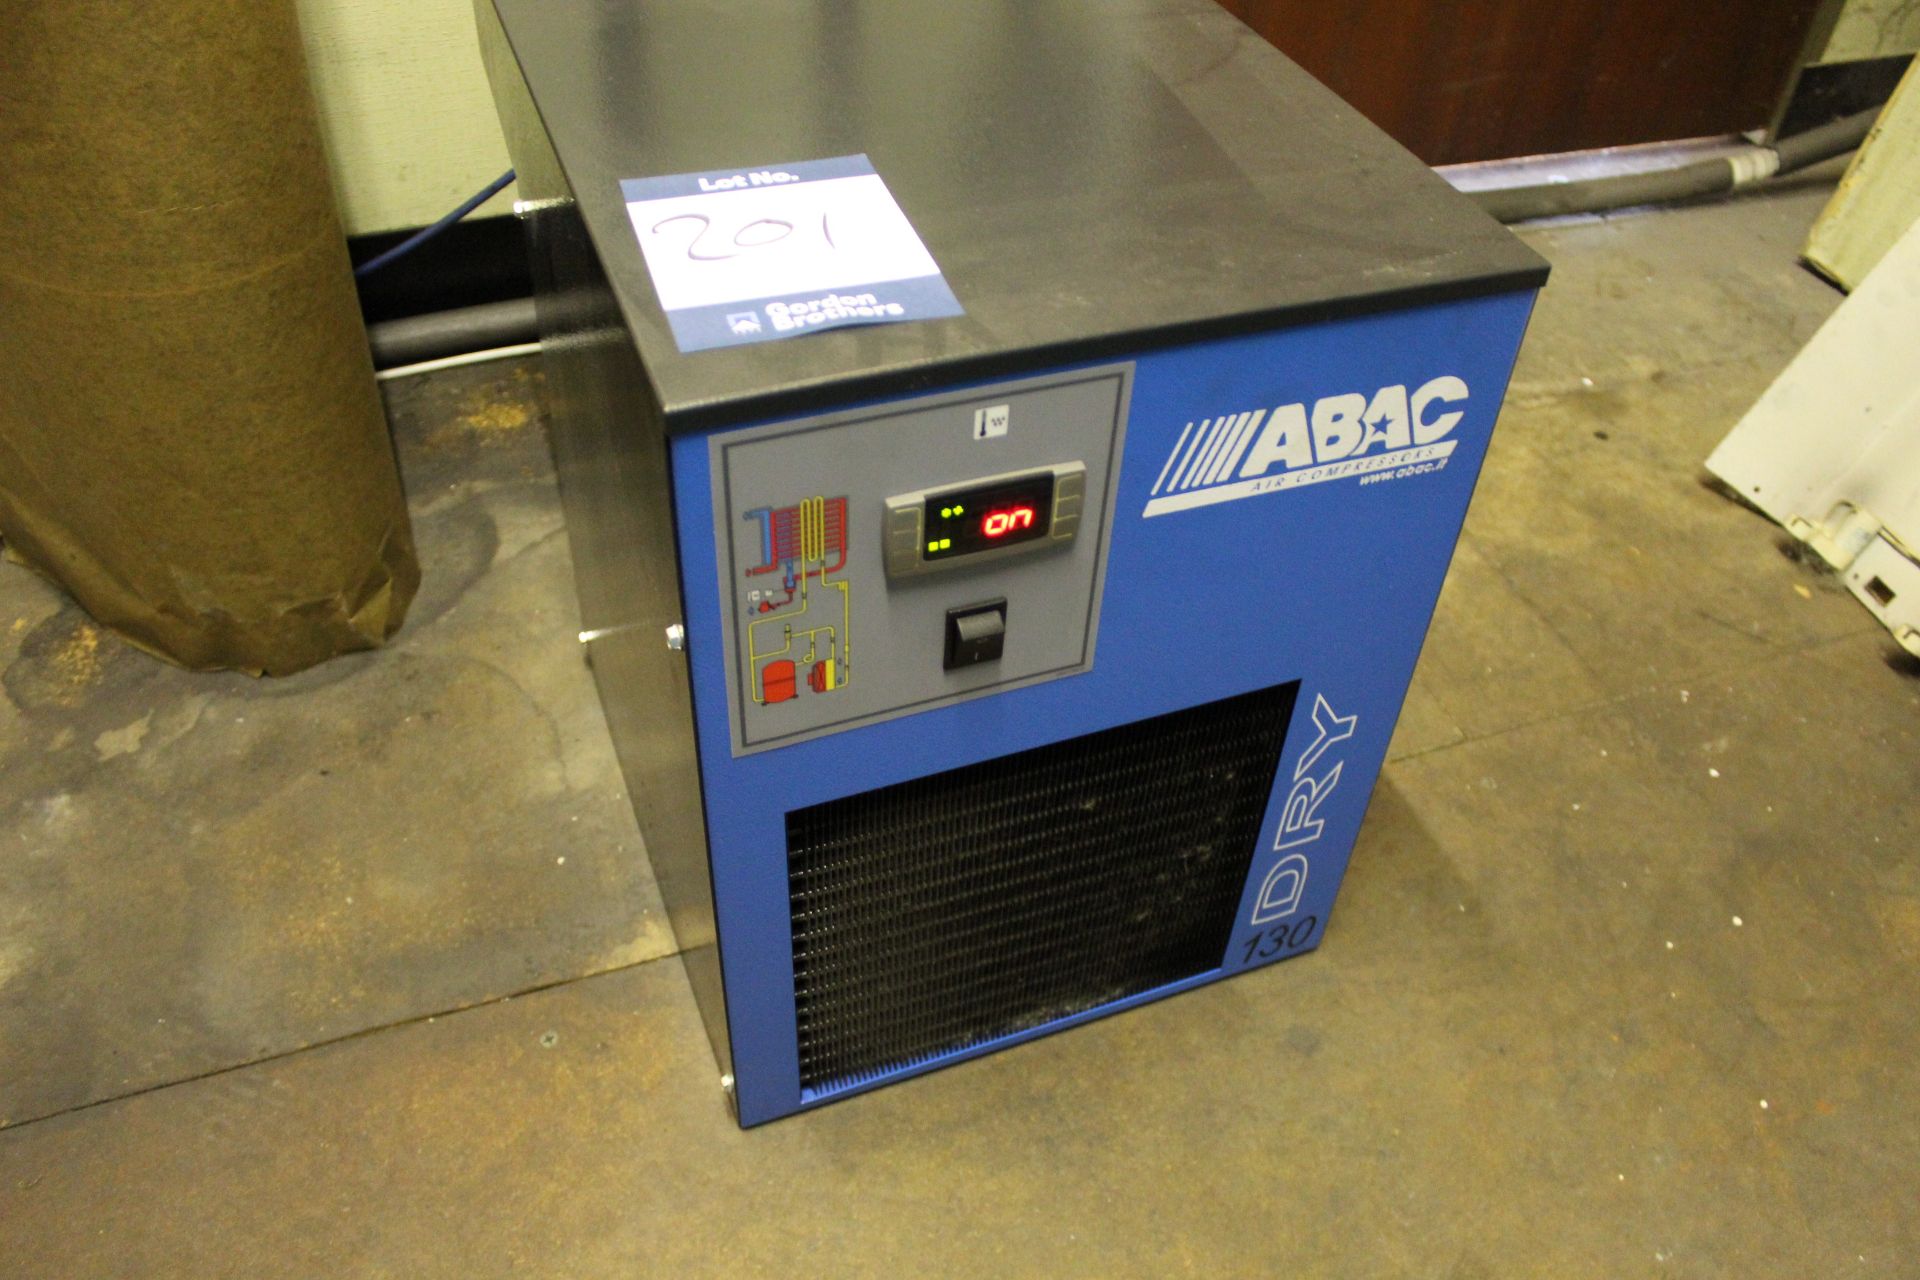 Hydrovane 67 Model: 06708-000 rotary vane air compressor, Serial No. 8909HV771304/3 with Abac Dry - Image 5 of 10